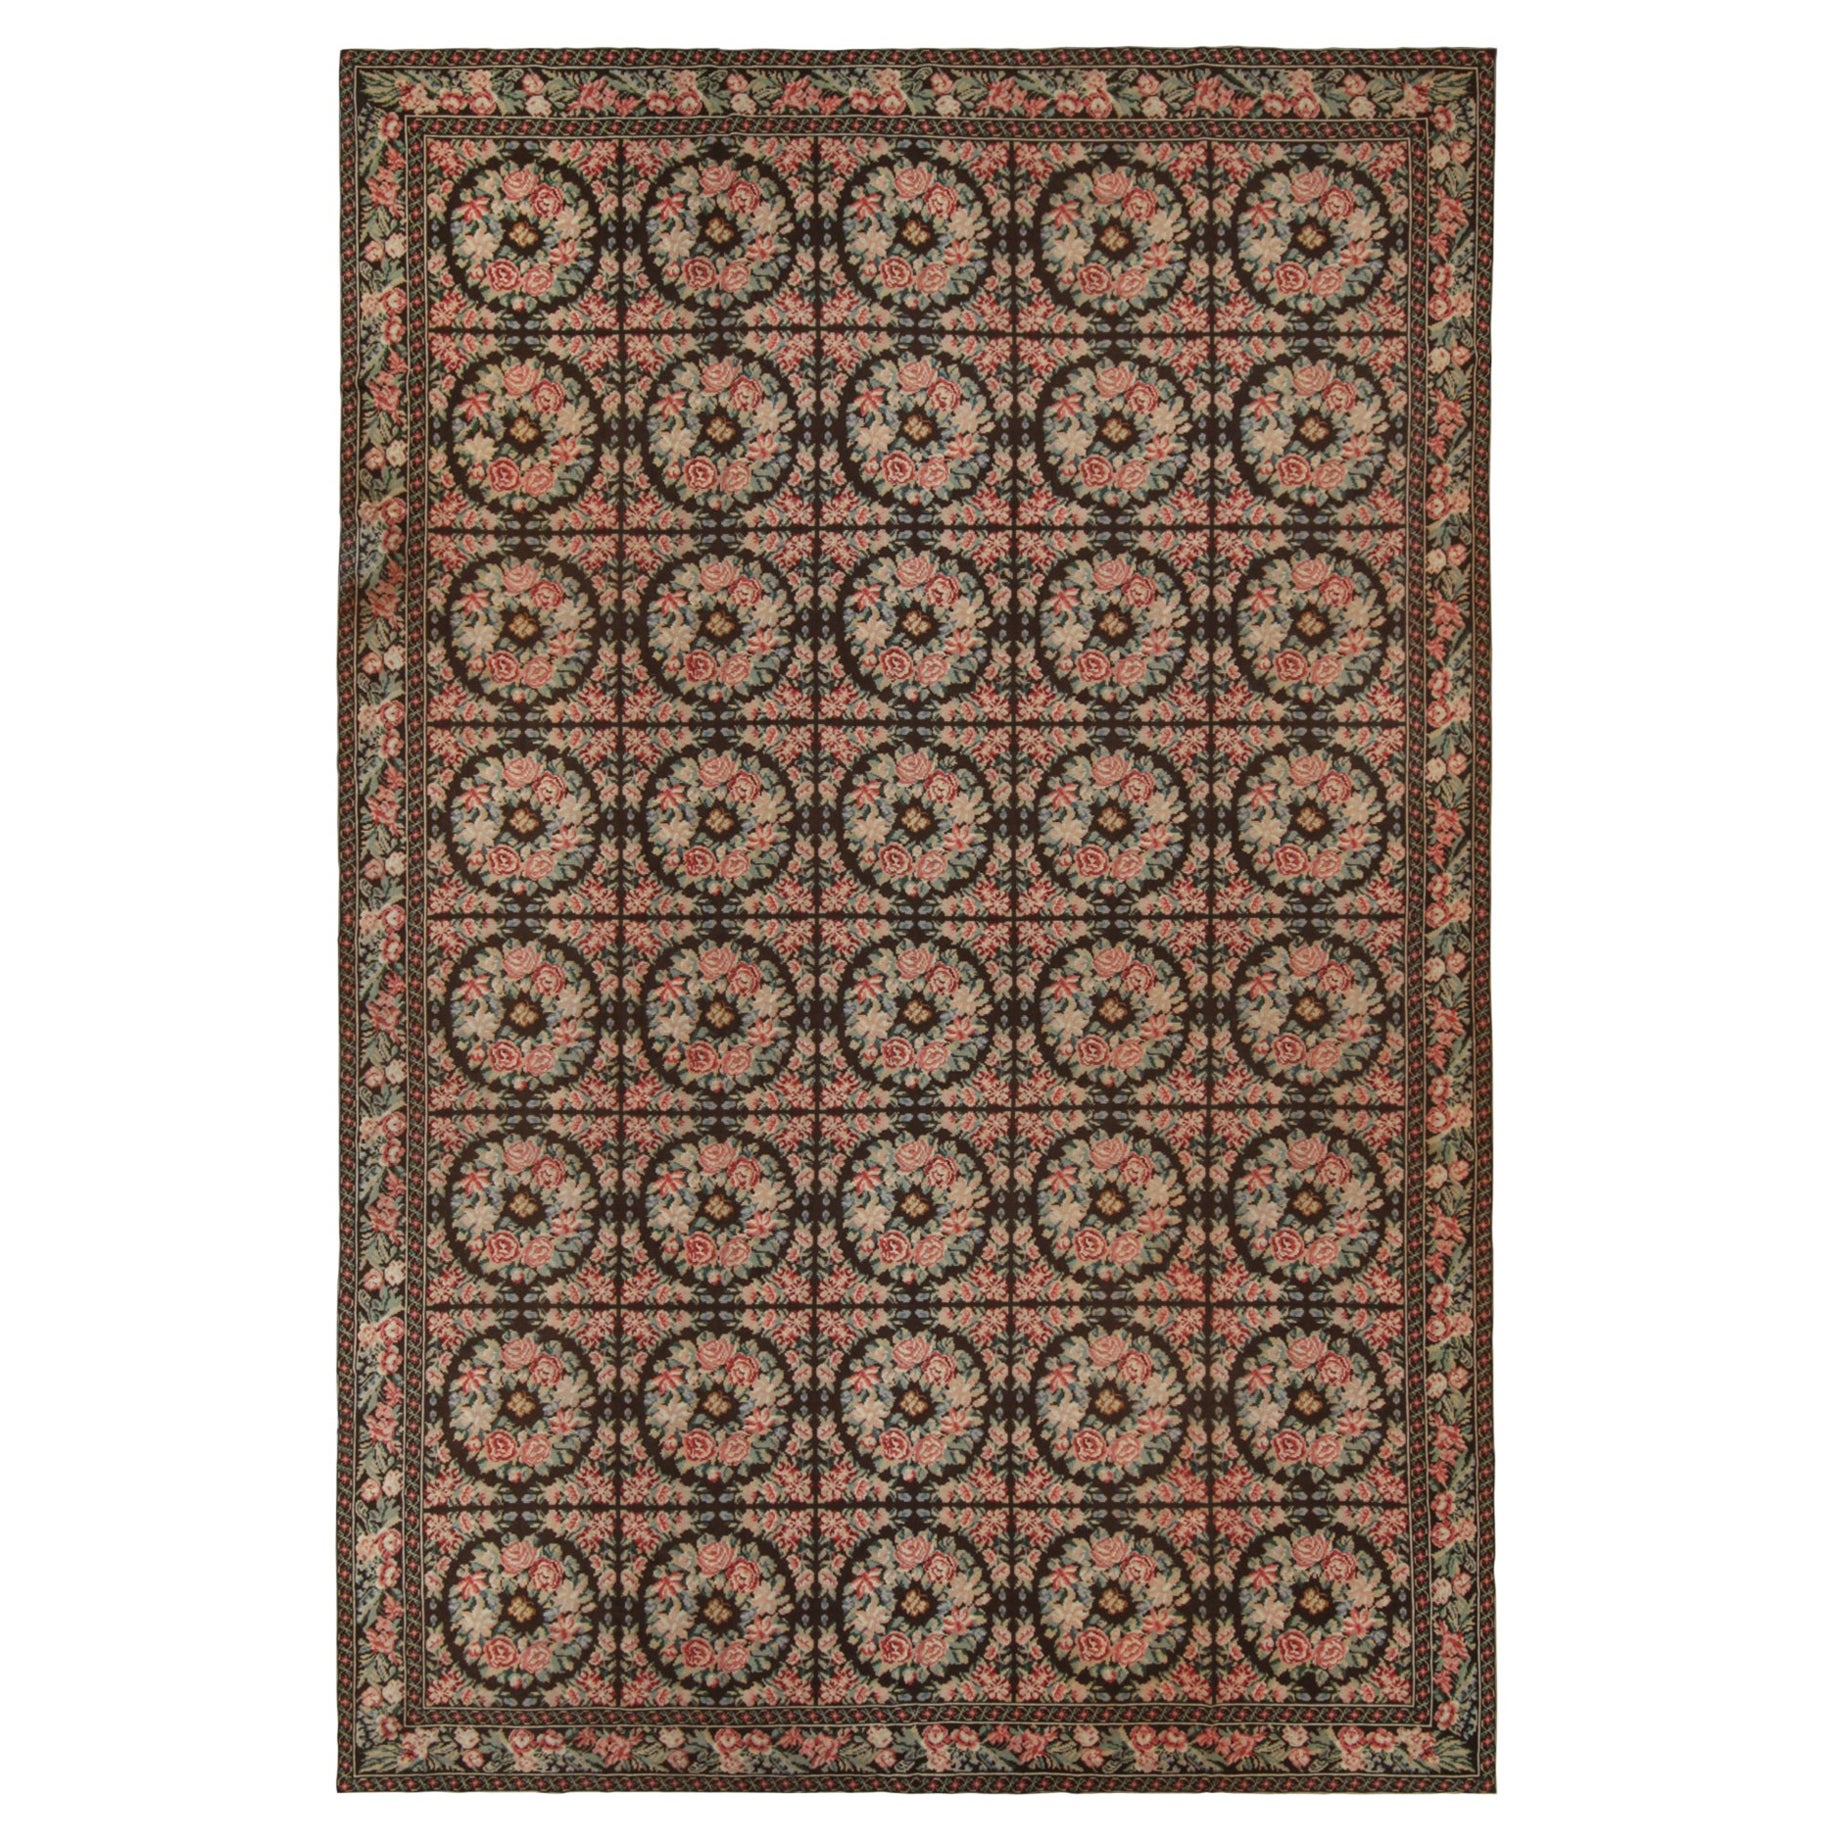 Antique Needlepoint rug in Brown with Botanical Florals, from Rug & Kilim For Sale